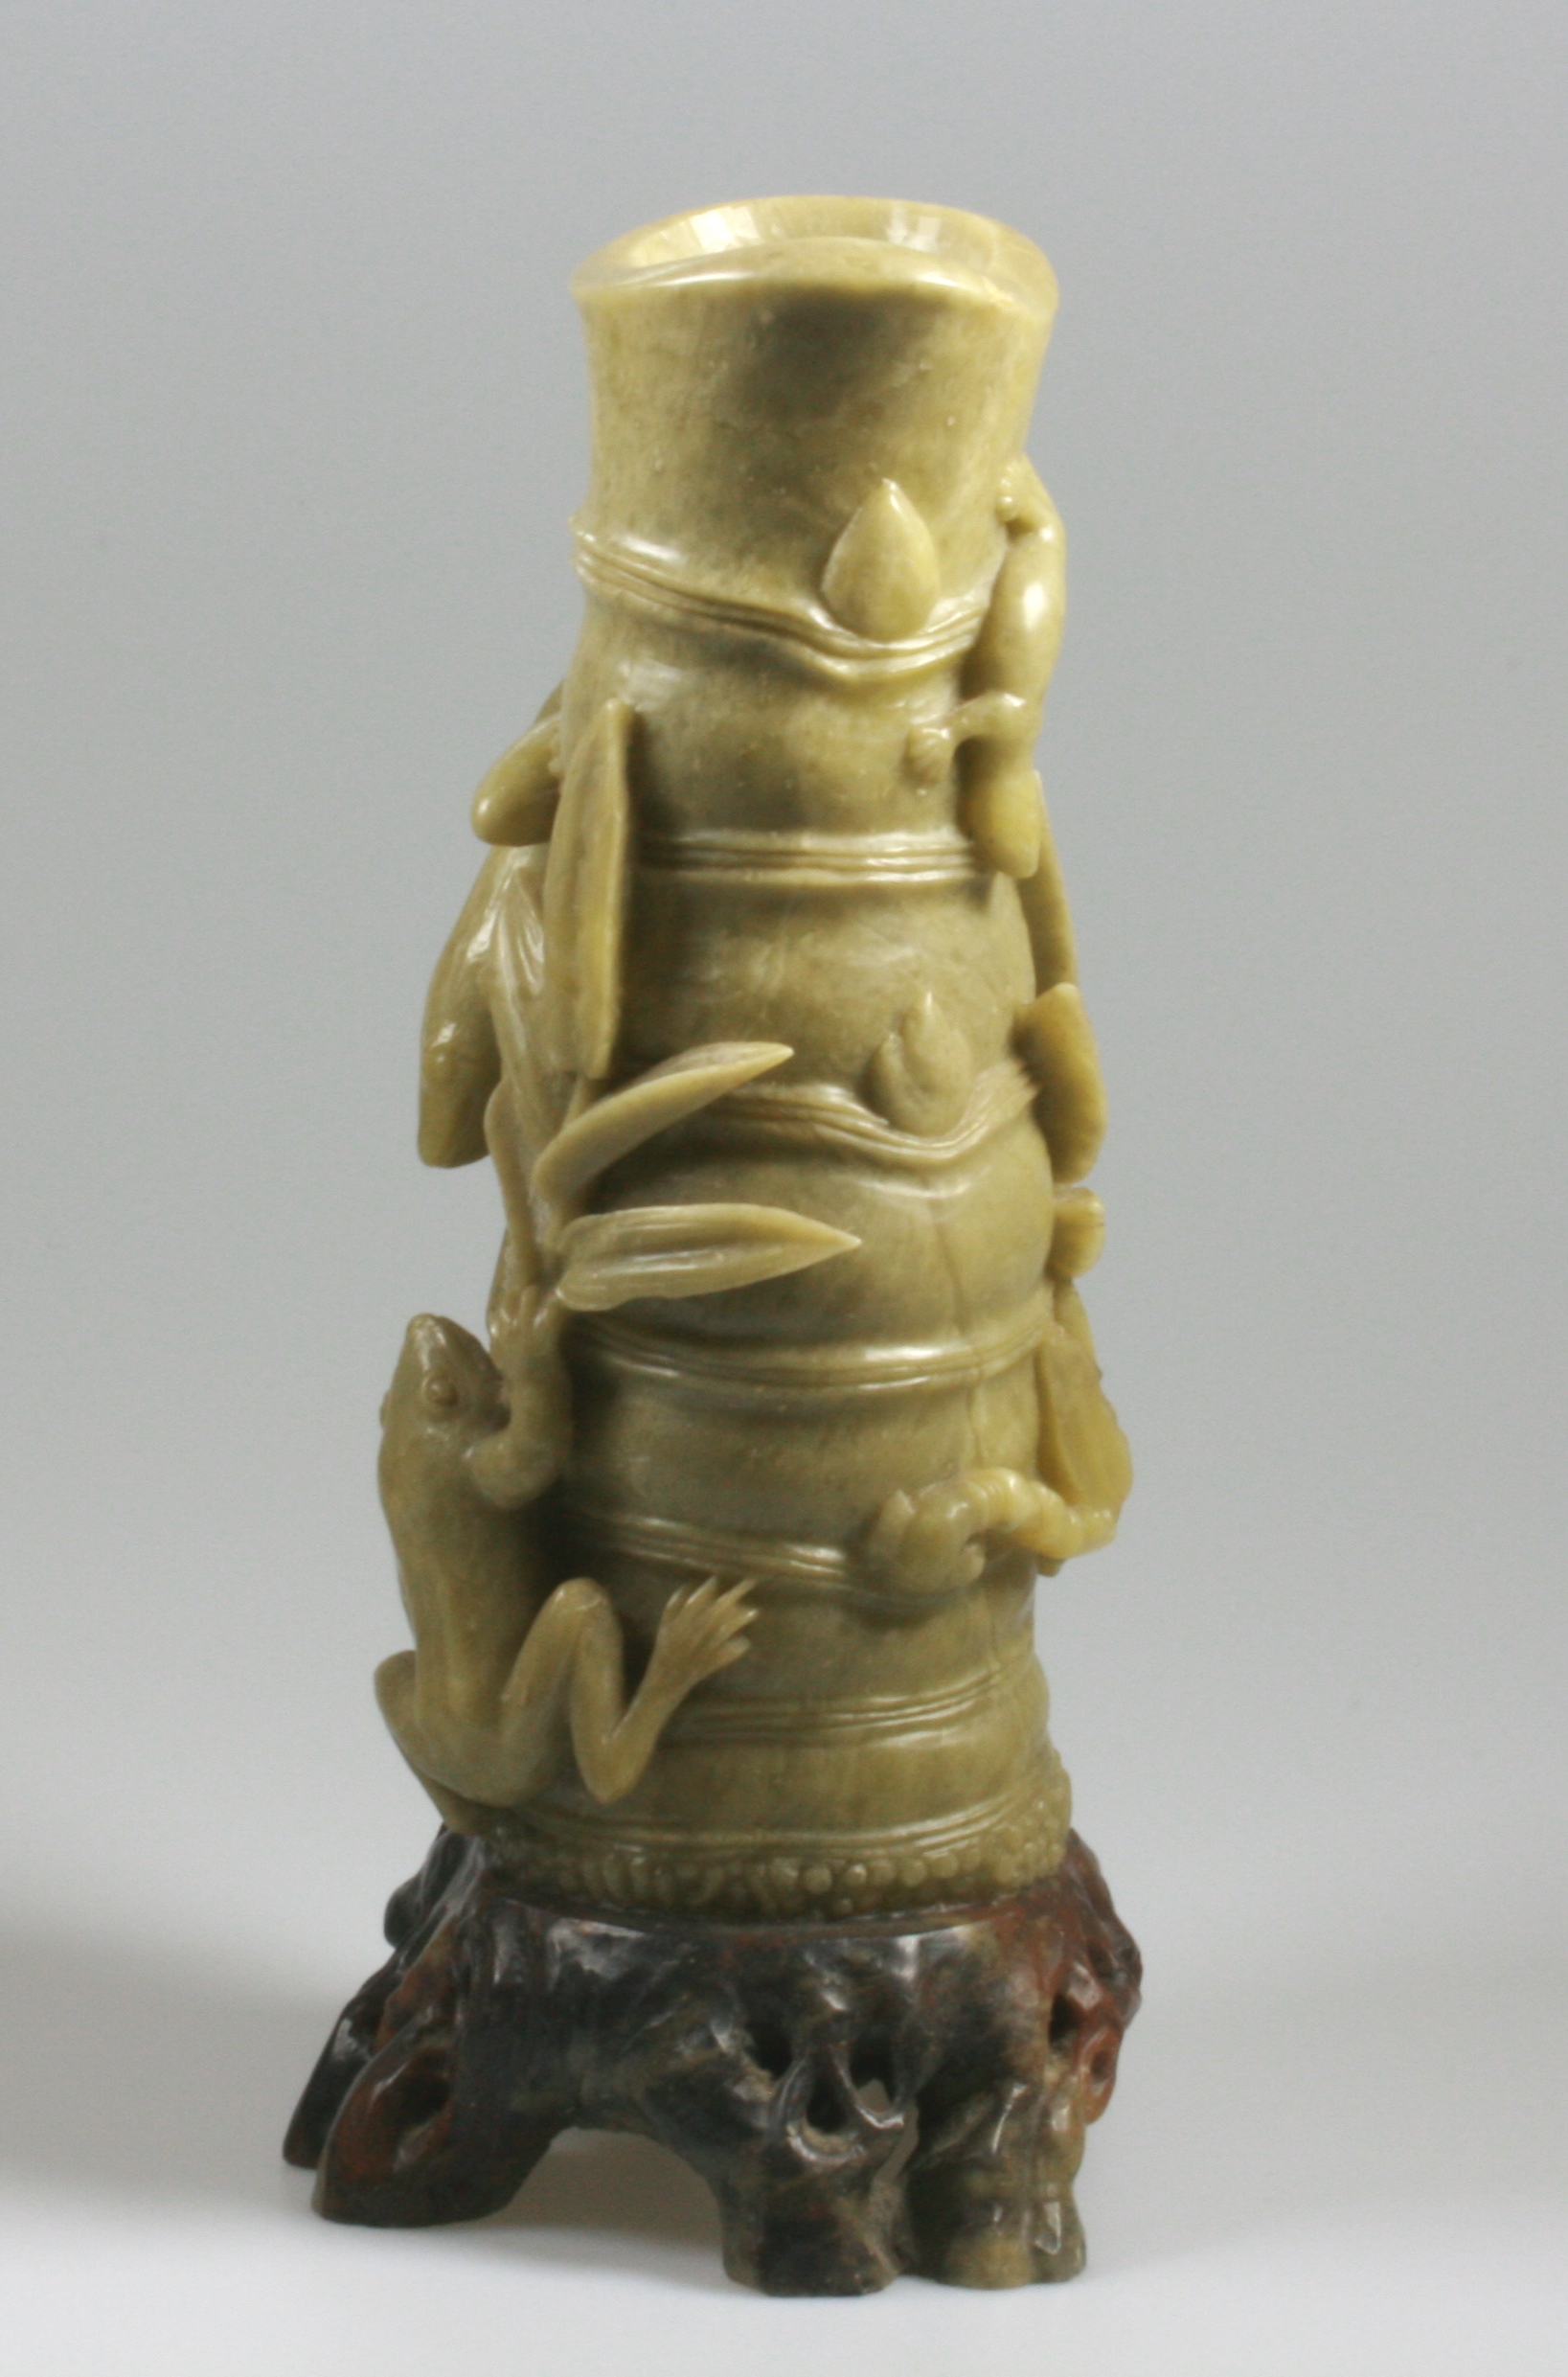 A Chinese Soapstone Brush Holder. 19th century. Carved in the form of bamboo stalks with climbing